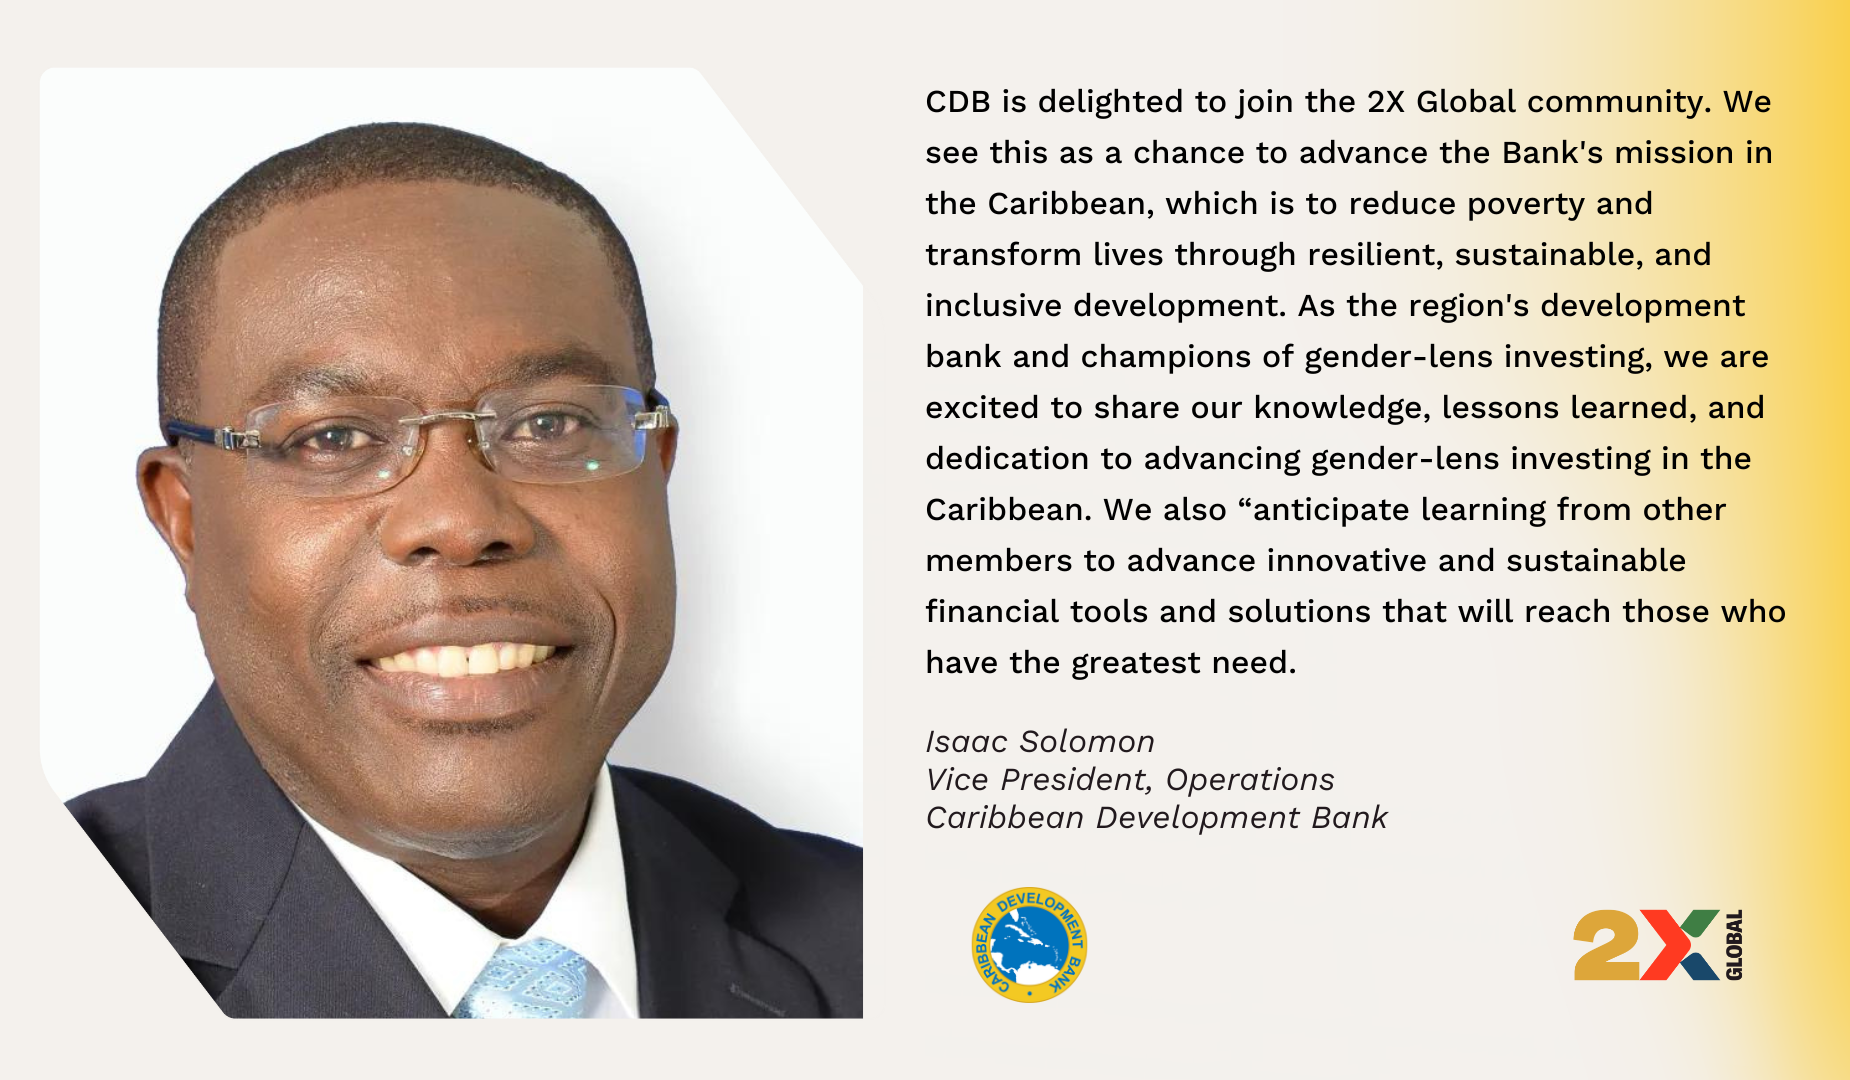 An image of the CDB's VPO Isaac Solomon accompanies a social media card with a statement acknowledging the CDB's joining of 2X Global